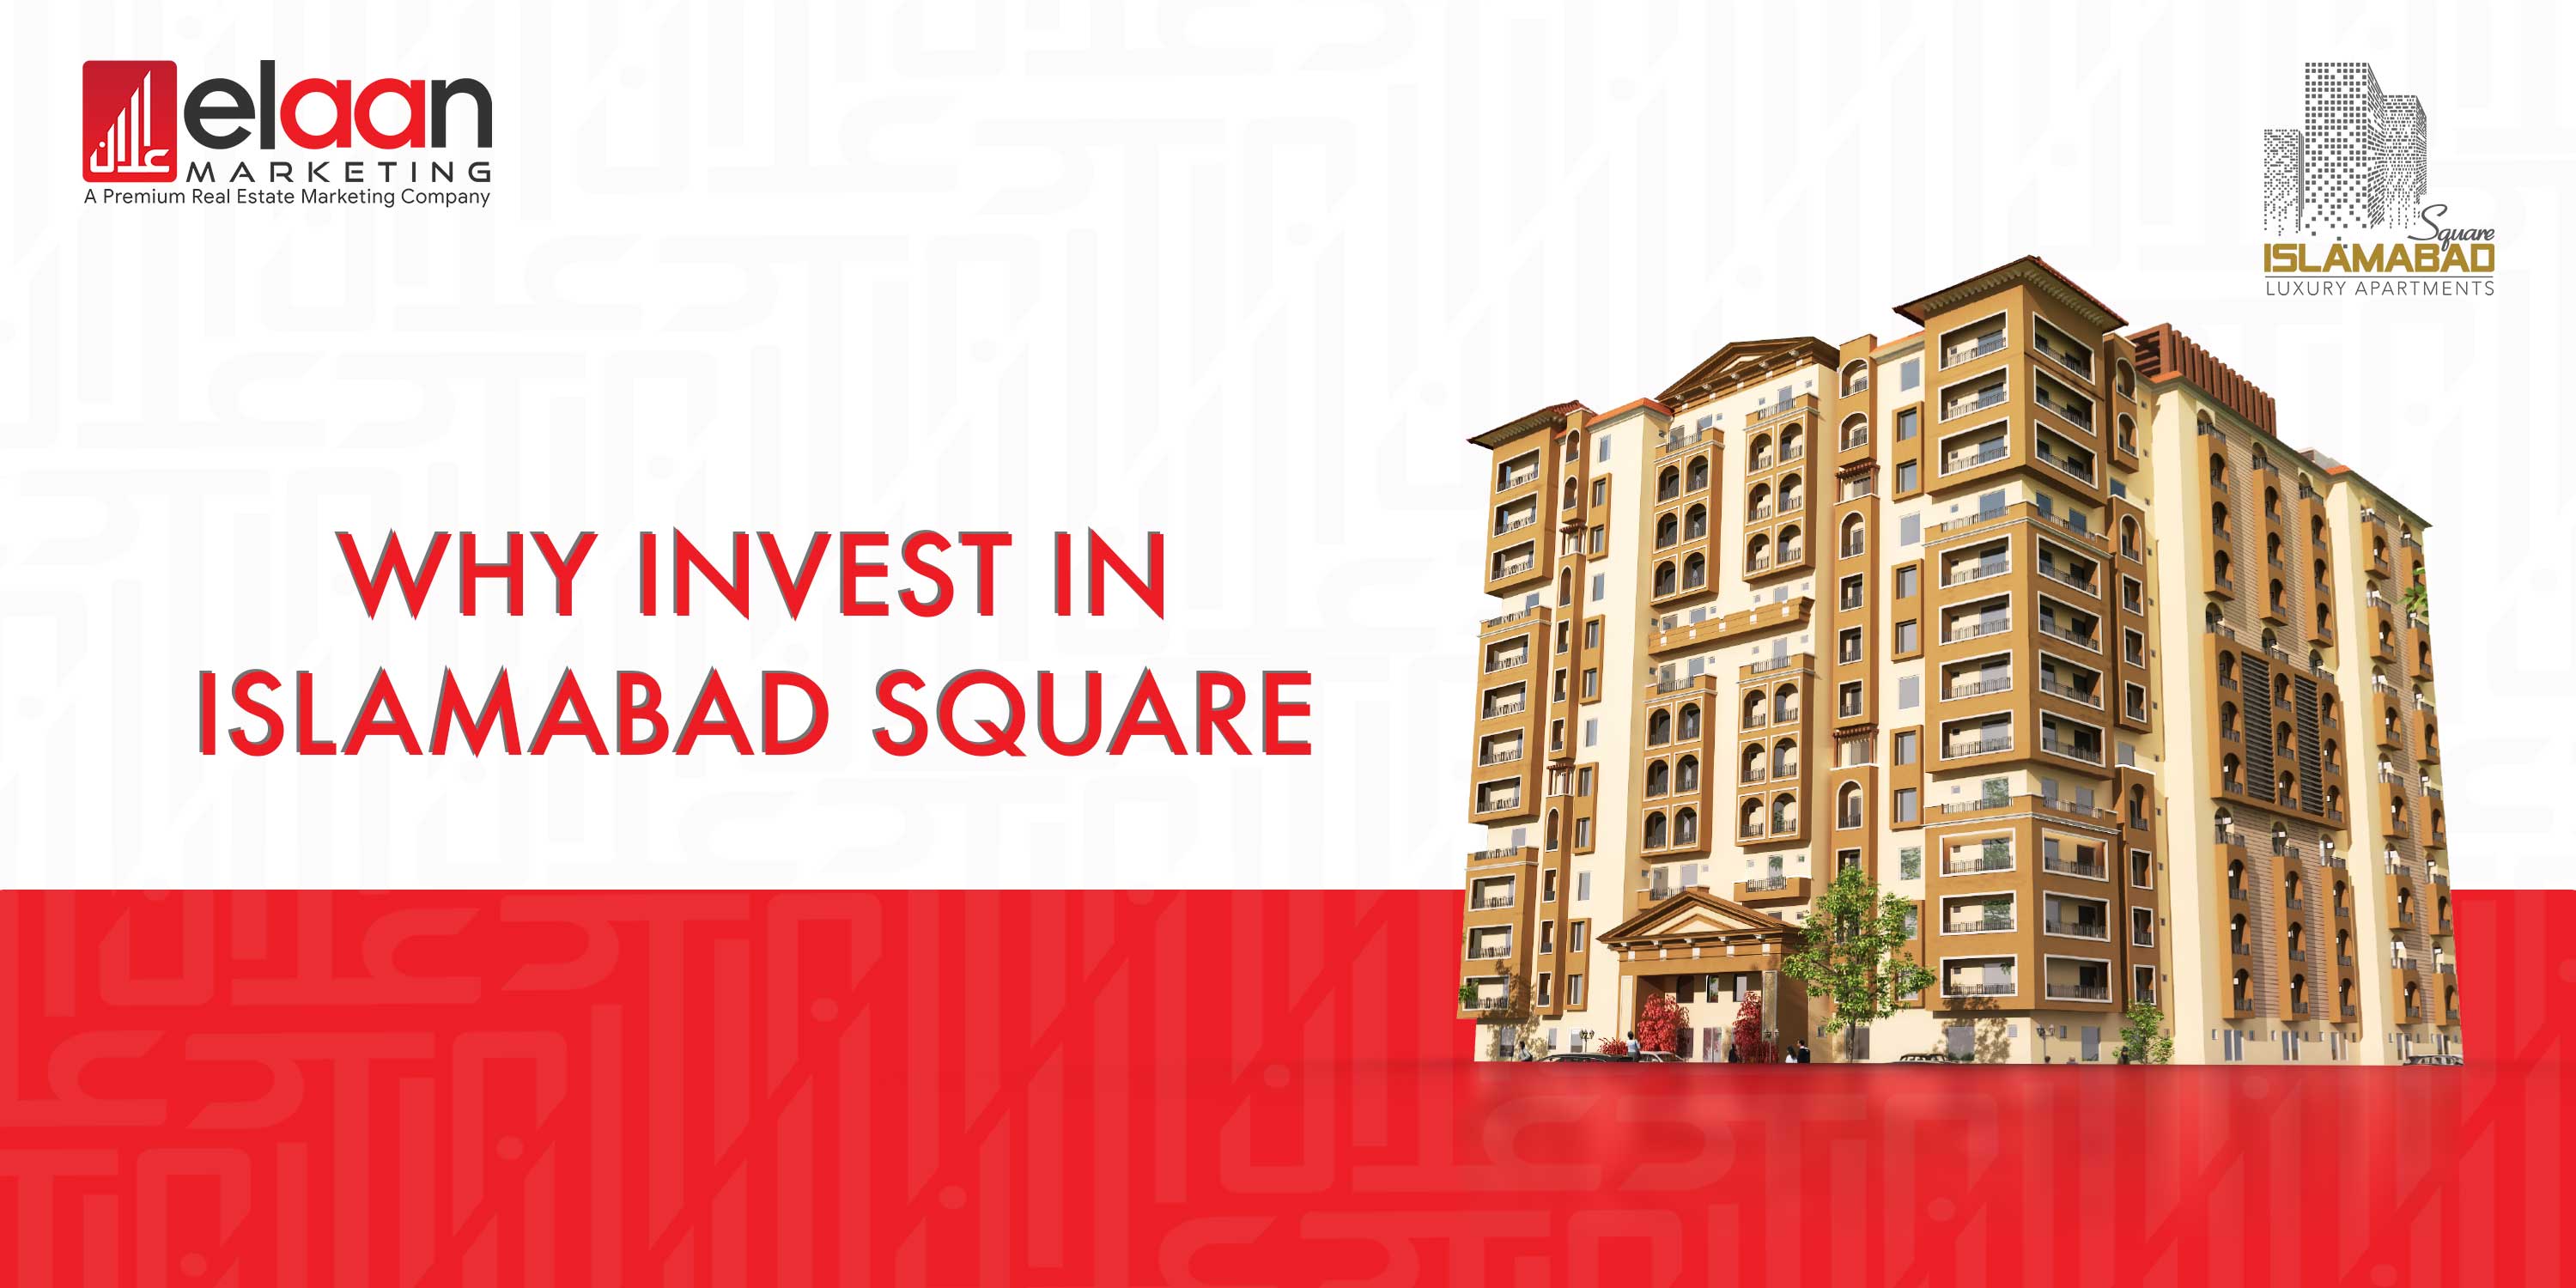 Why Invest in Islamabad Square?